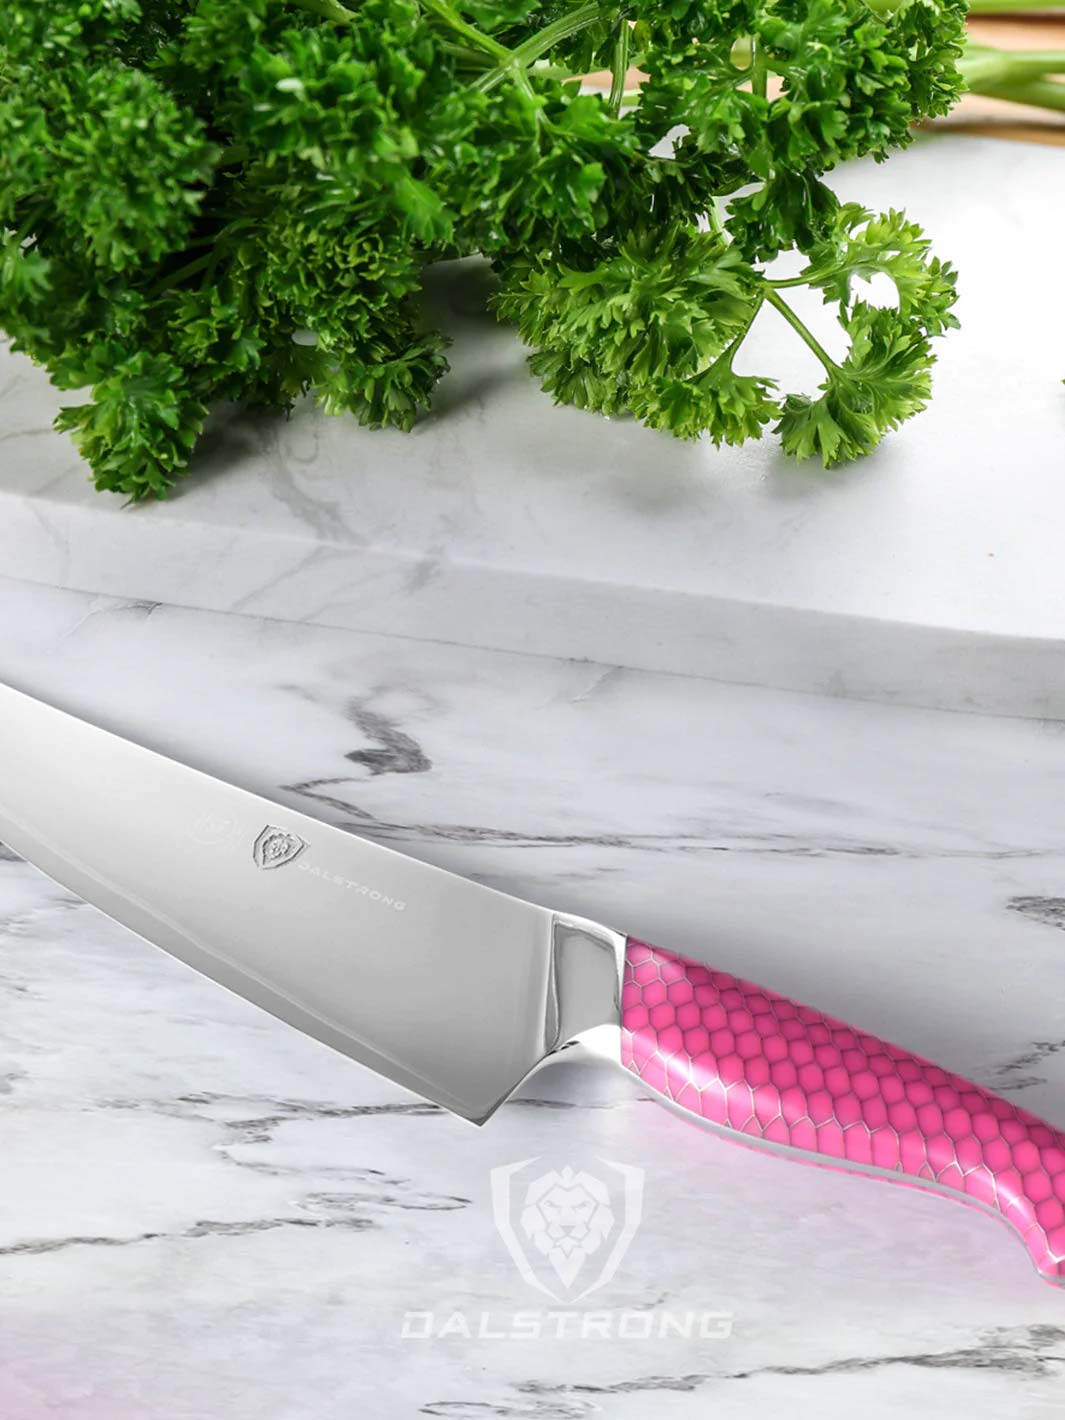 Dalstrong frost fire series 8 inch chef knife with pink handle and parsley on a white board.